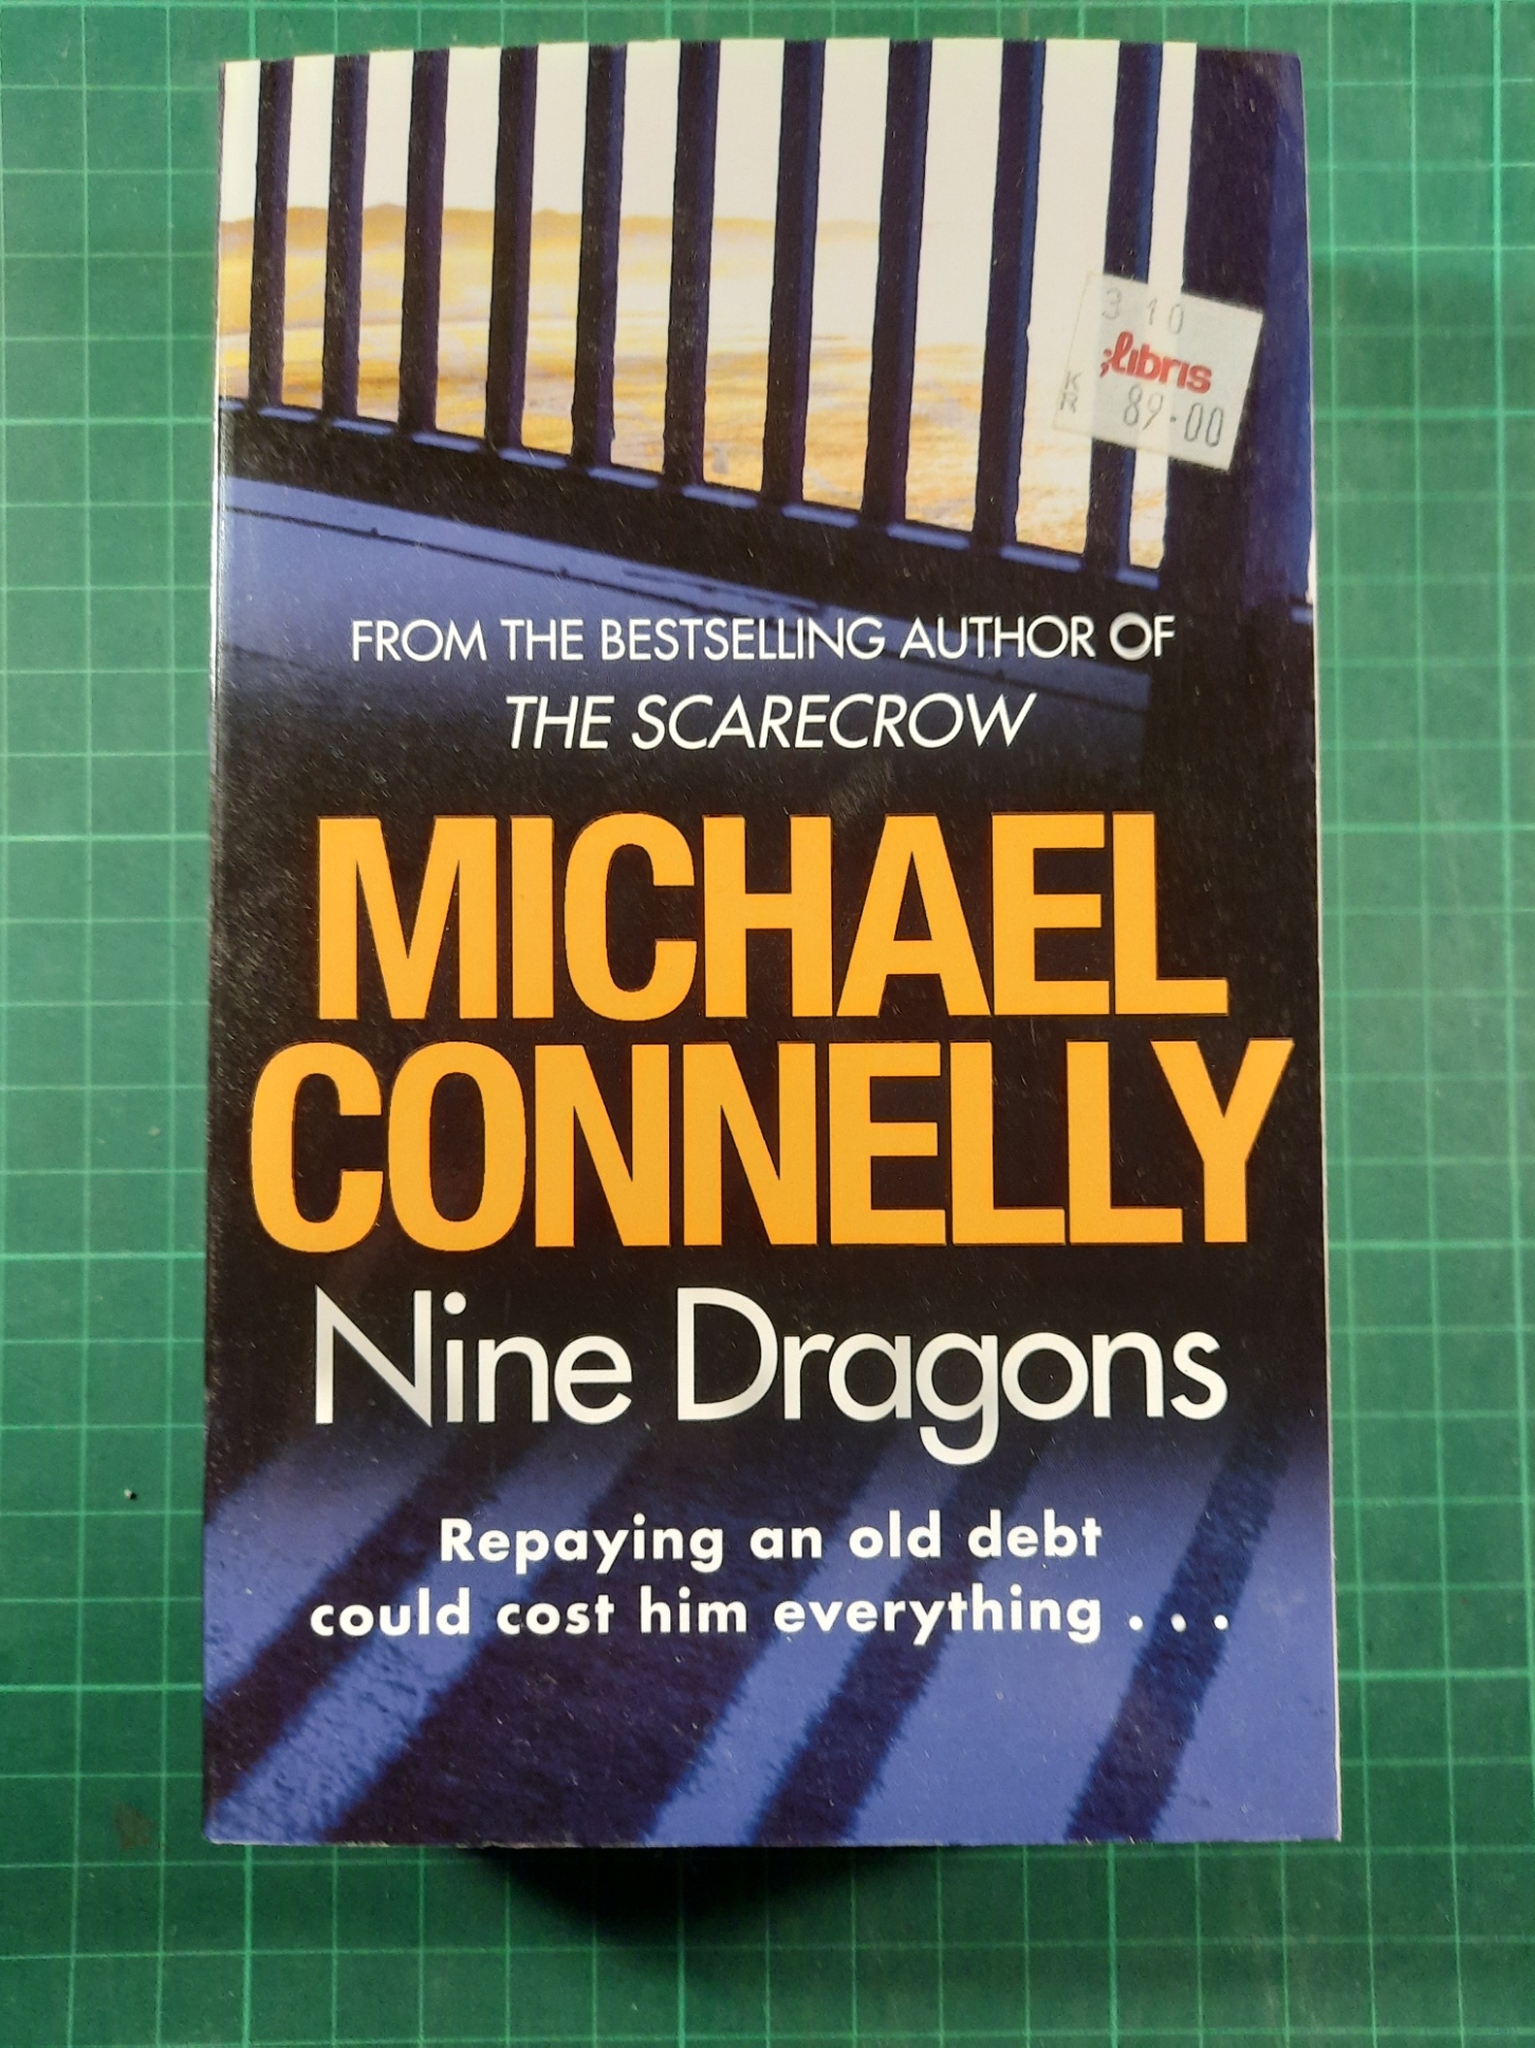 Michael Connelly : Nine dragons